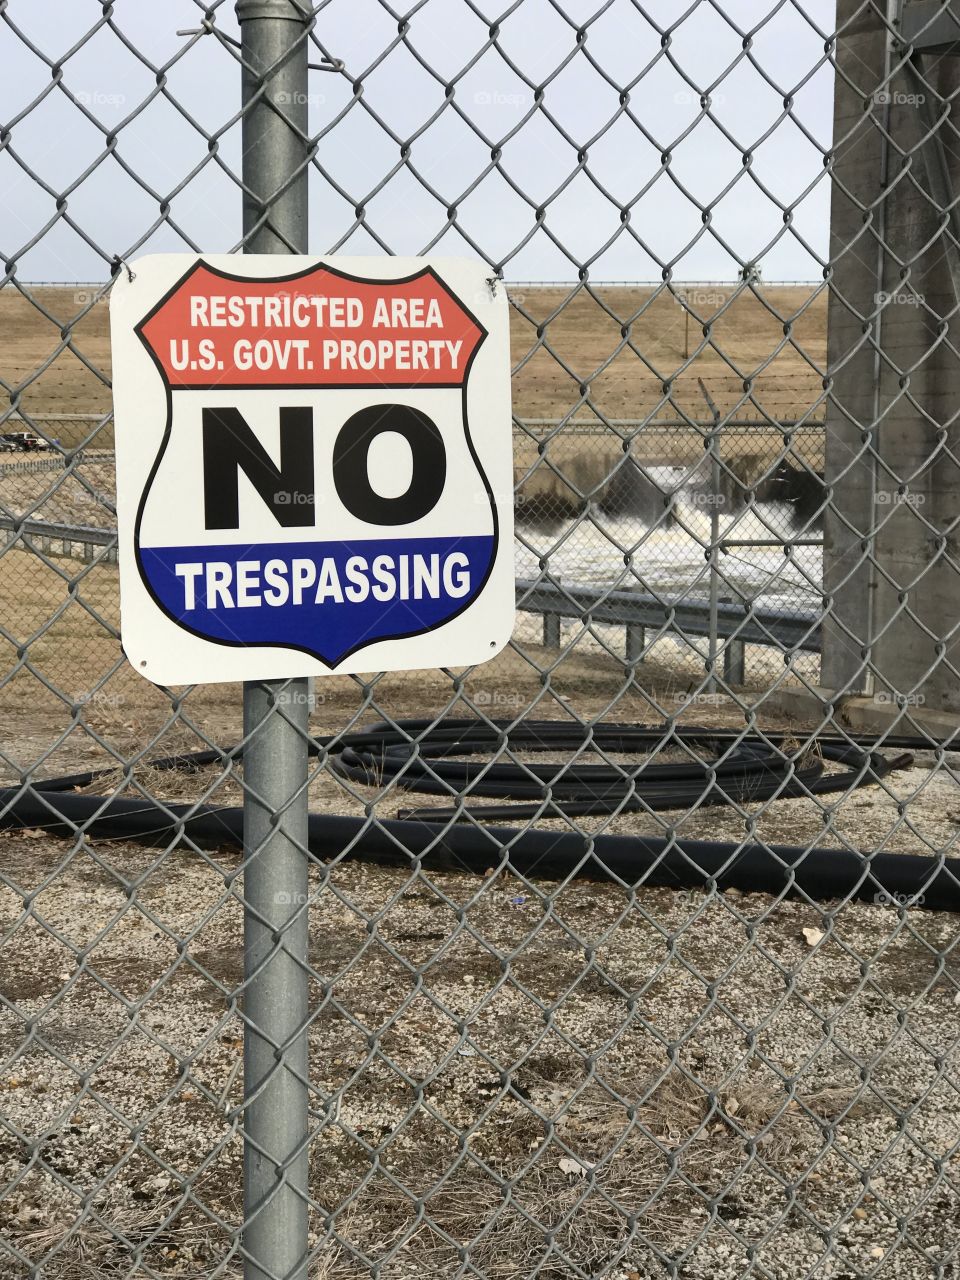 US Army Corps of Engineers, restricted area, US Govt Property, no trespassing sign, winter January, In background Dam and water release area beyond chain link fencing at Oologah Lake Oklahoma.